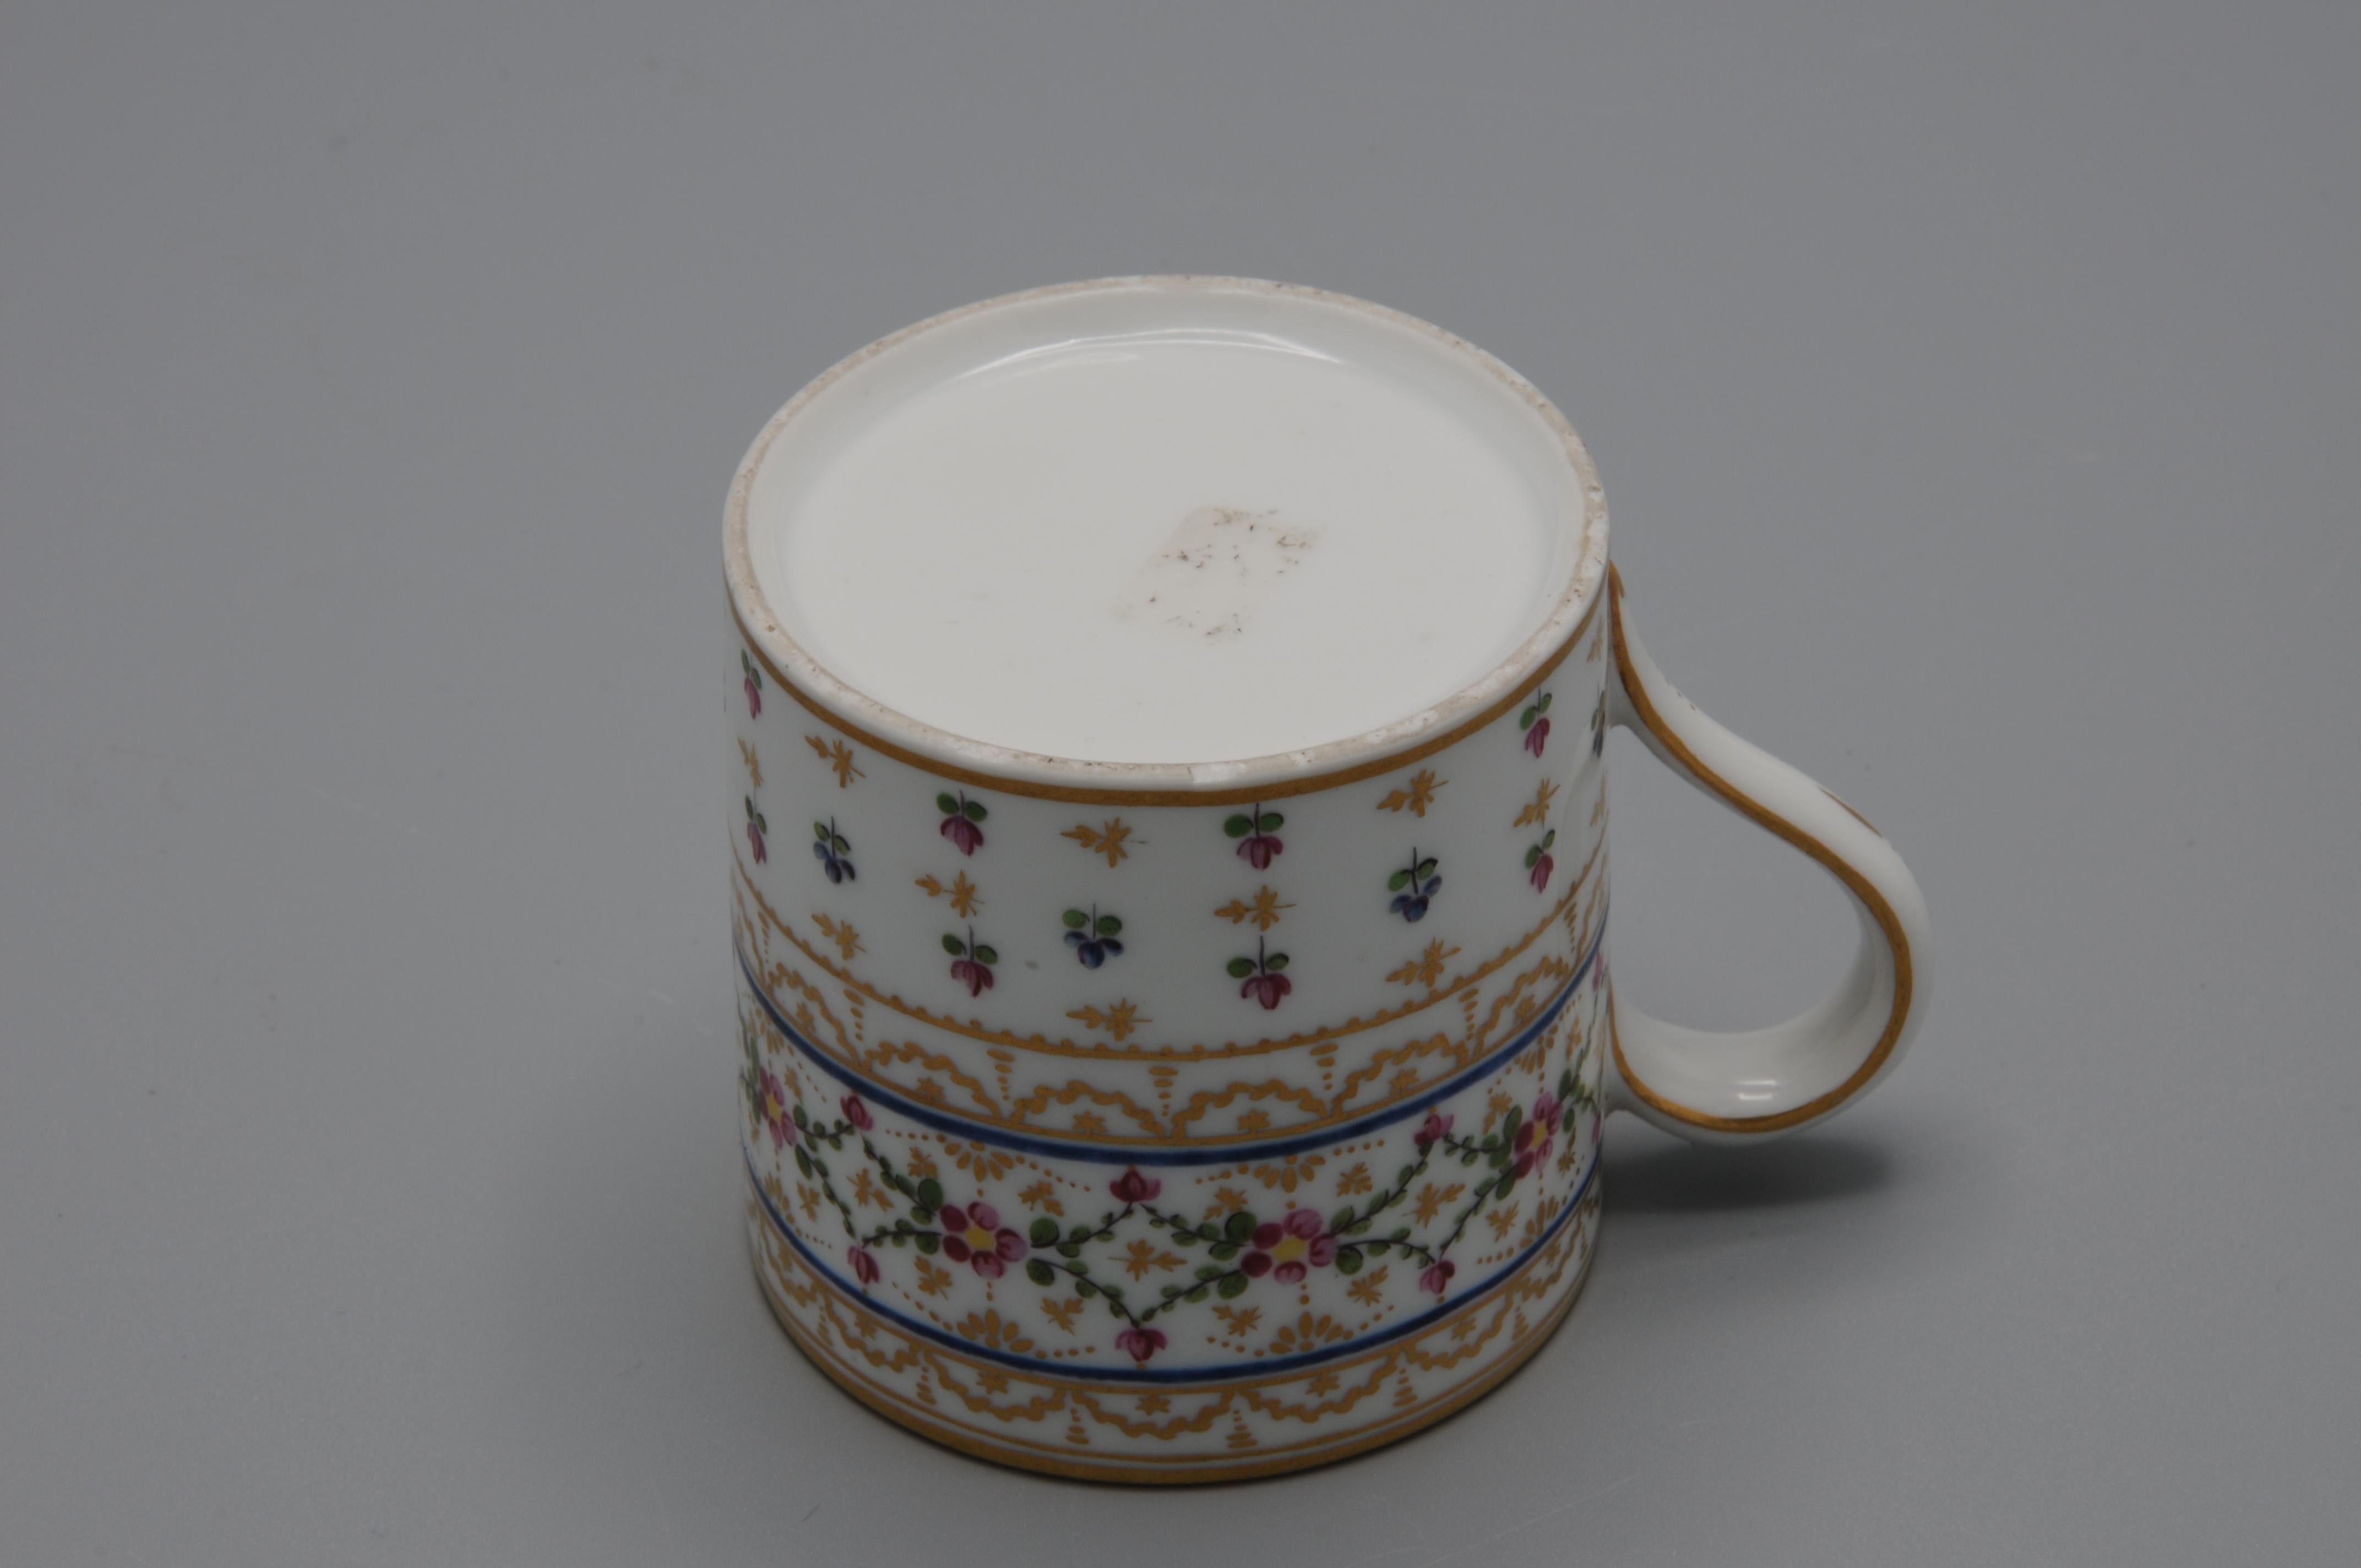 André Leboeuf, Manufacture à la Reine' - Cup and saucer 'Litron', late 18th For Sale 2